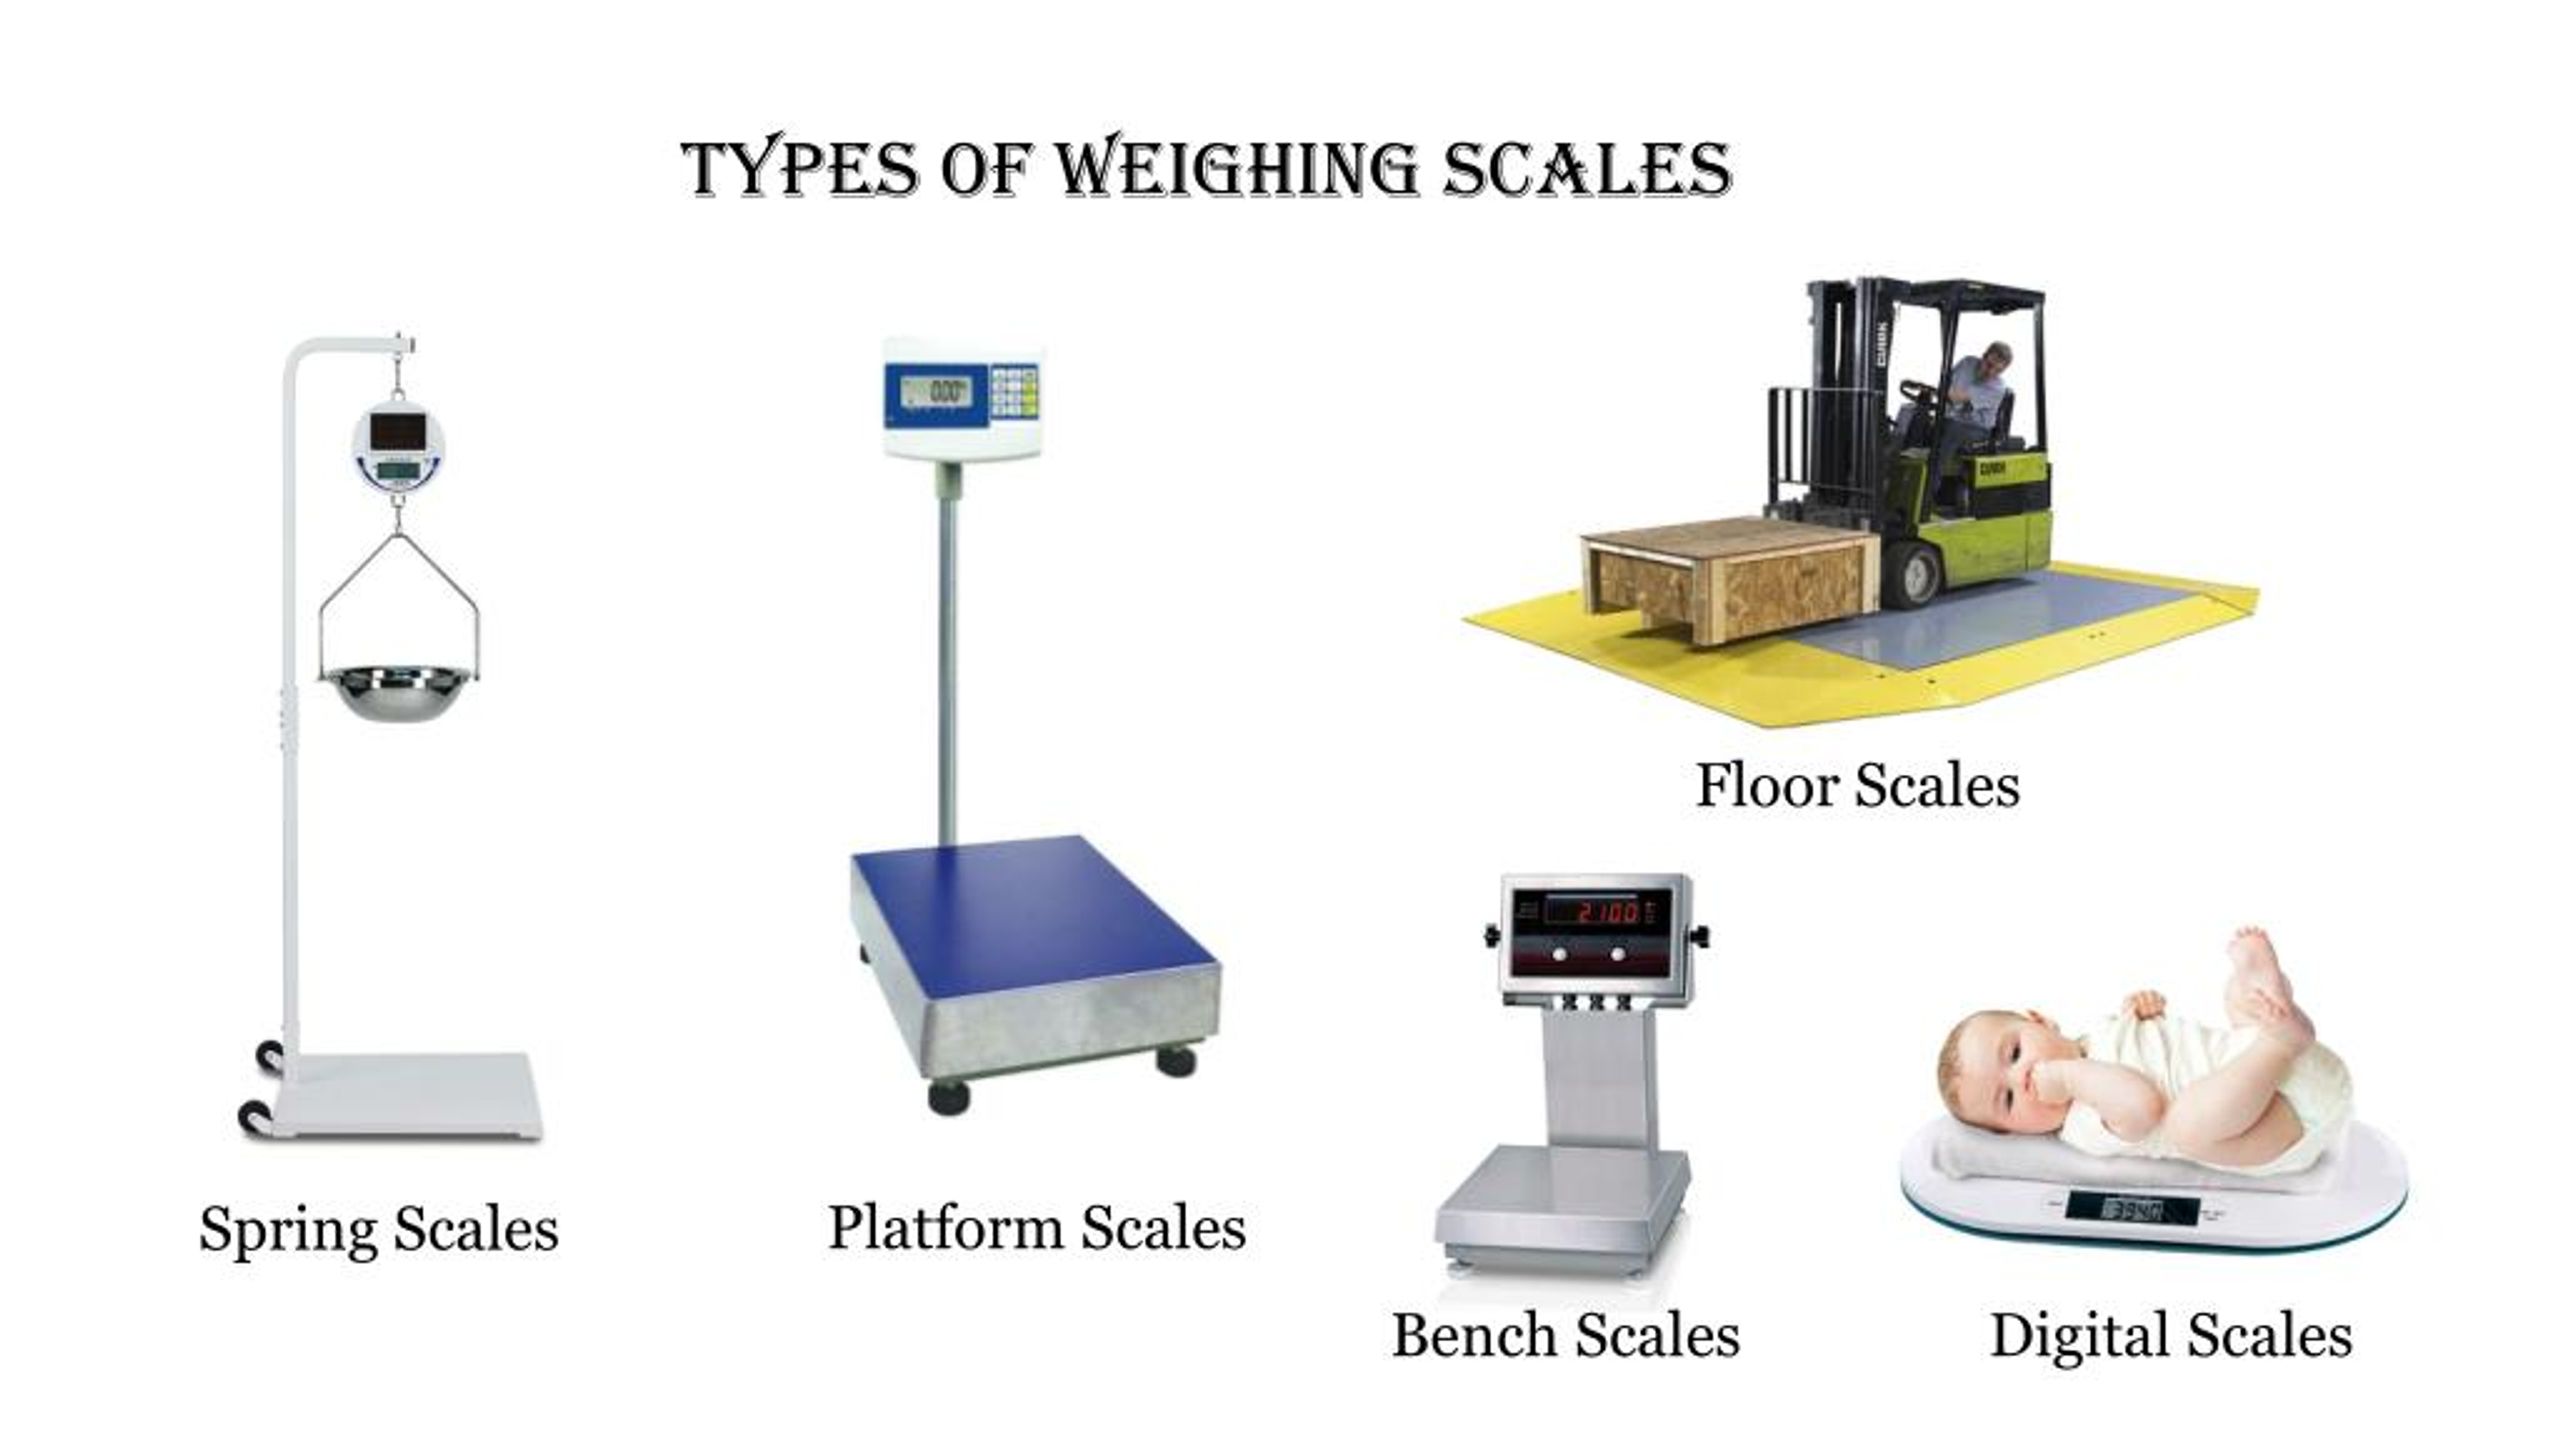 https://image4.slideserve.com/7564509/types-of-weighing-scales-l.jpg